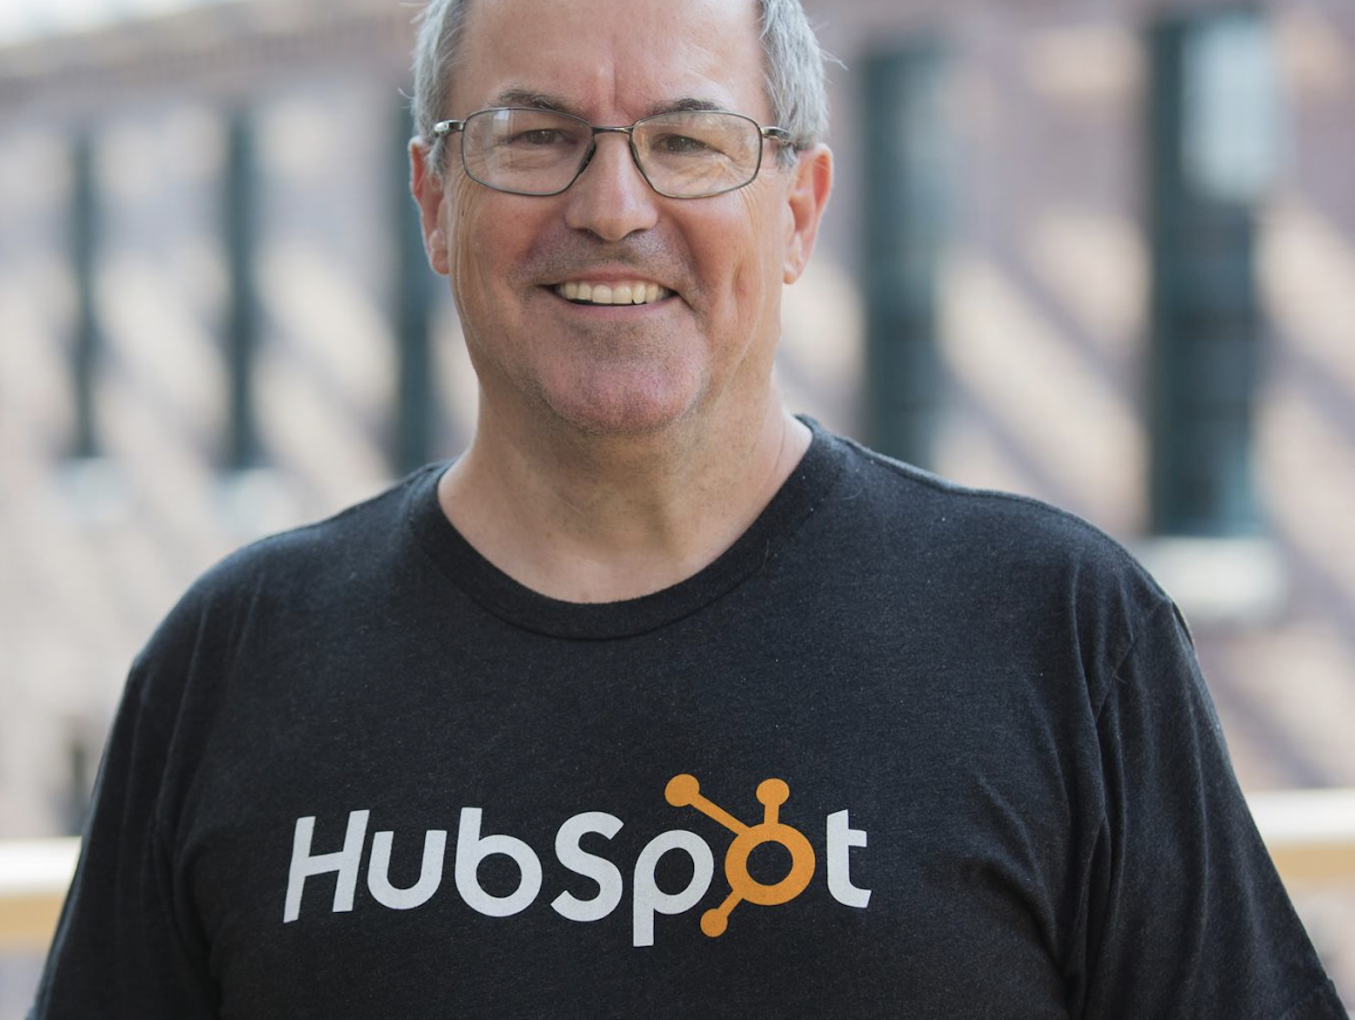 How did Dan Tyre become employee #6 at Hubspot?